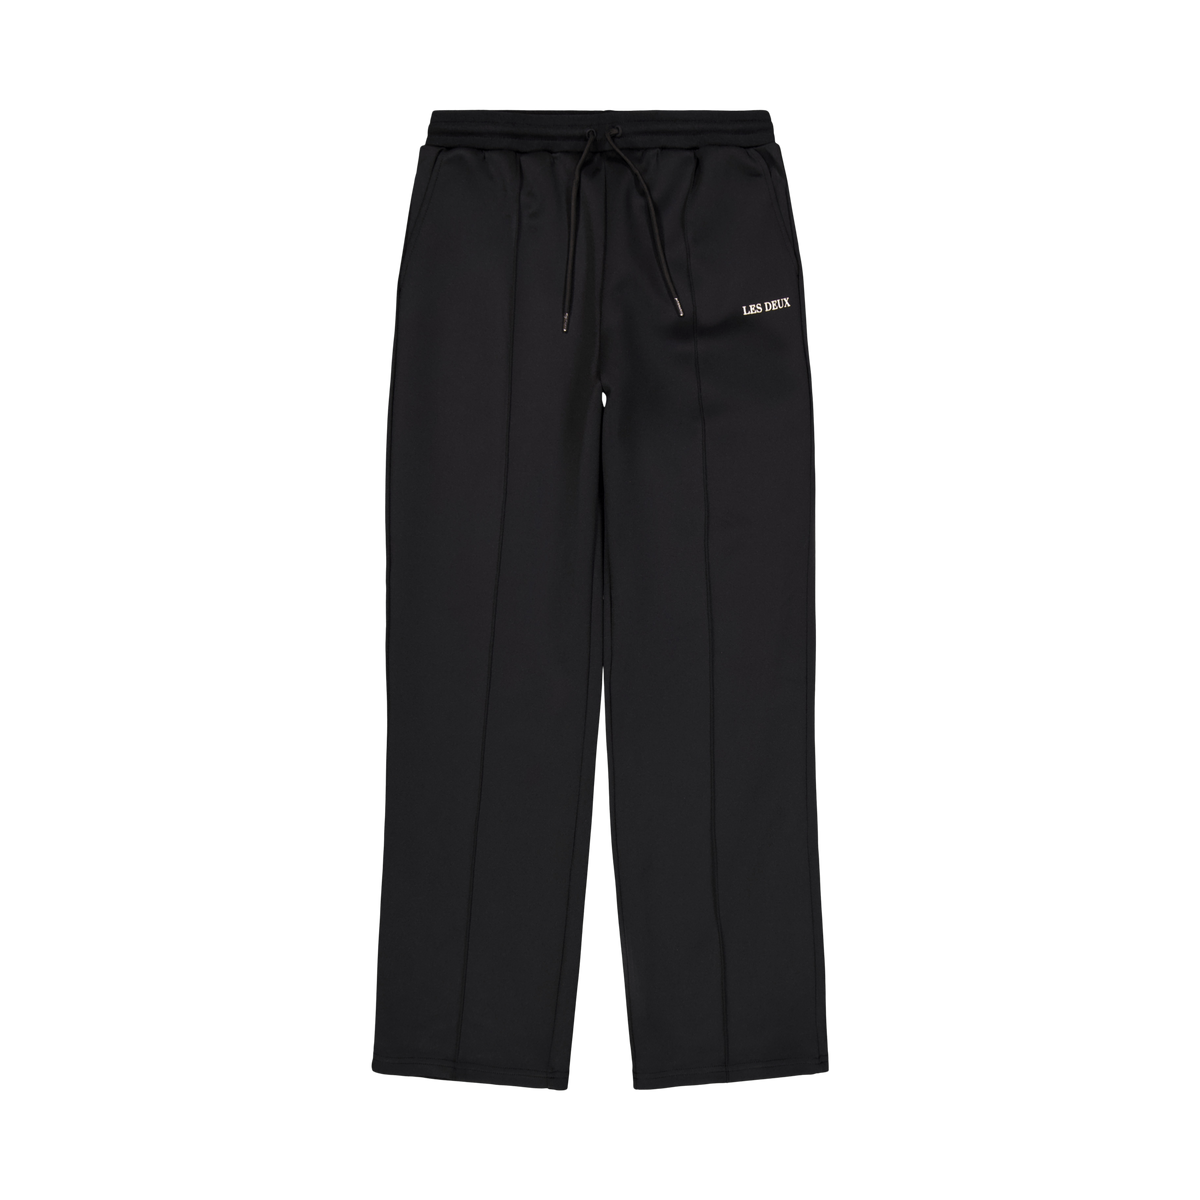 Ballier Casual Track Pants